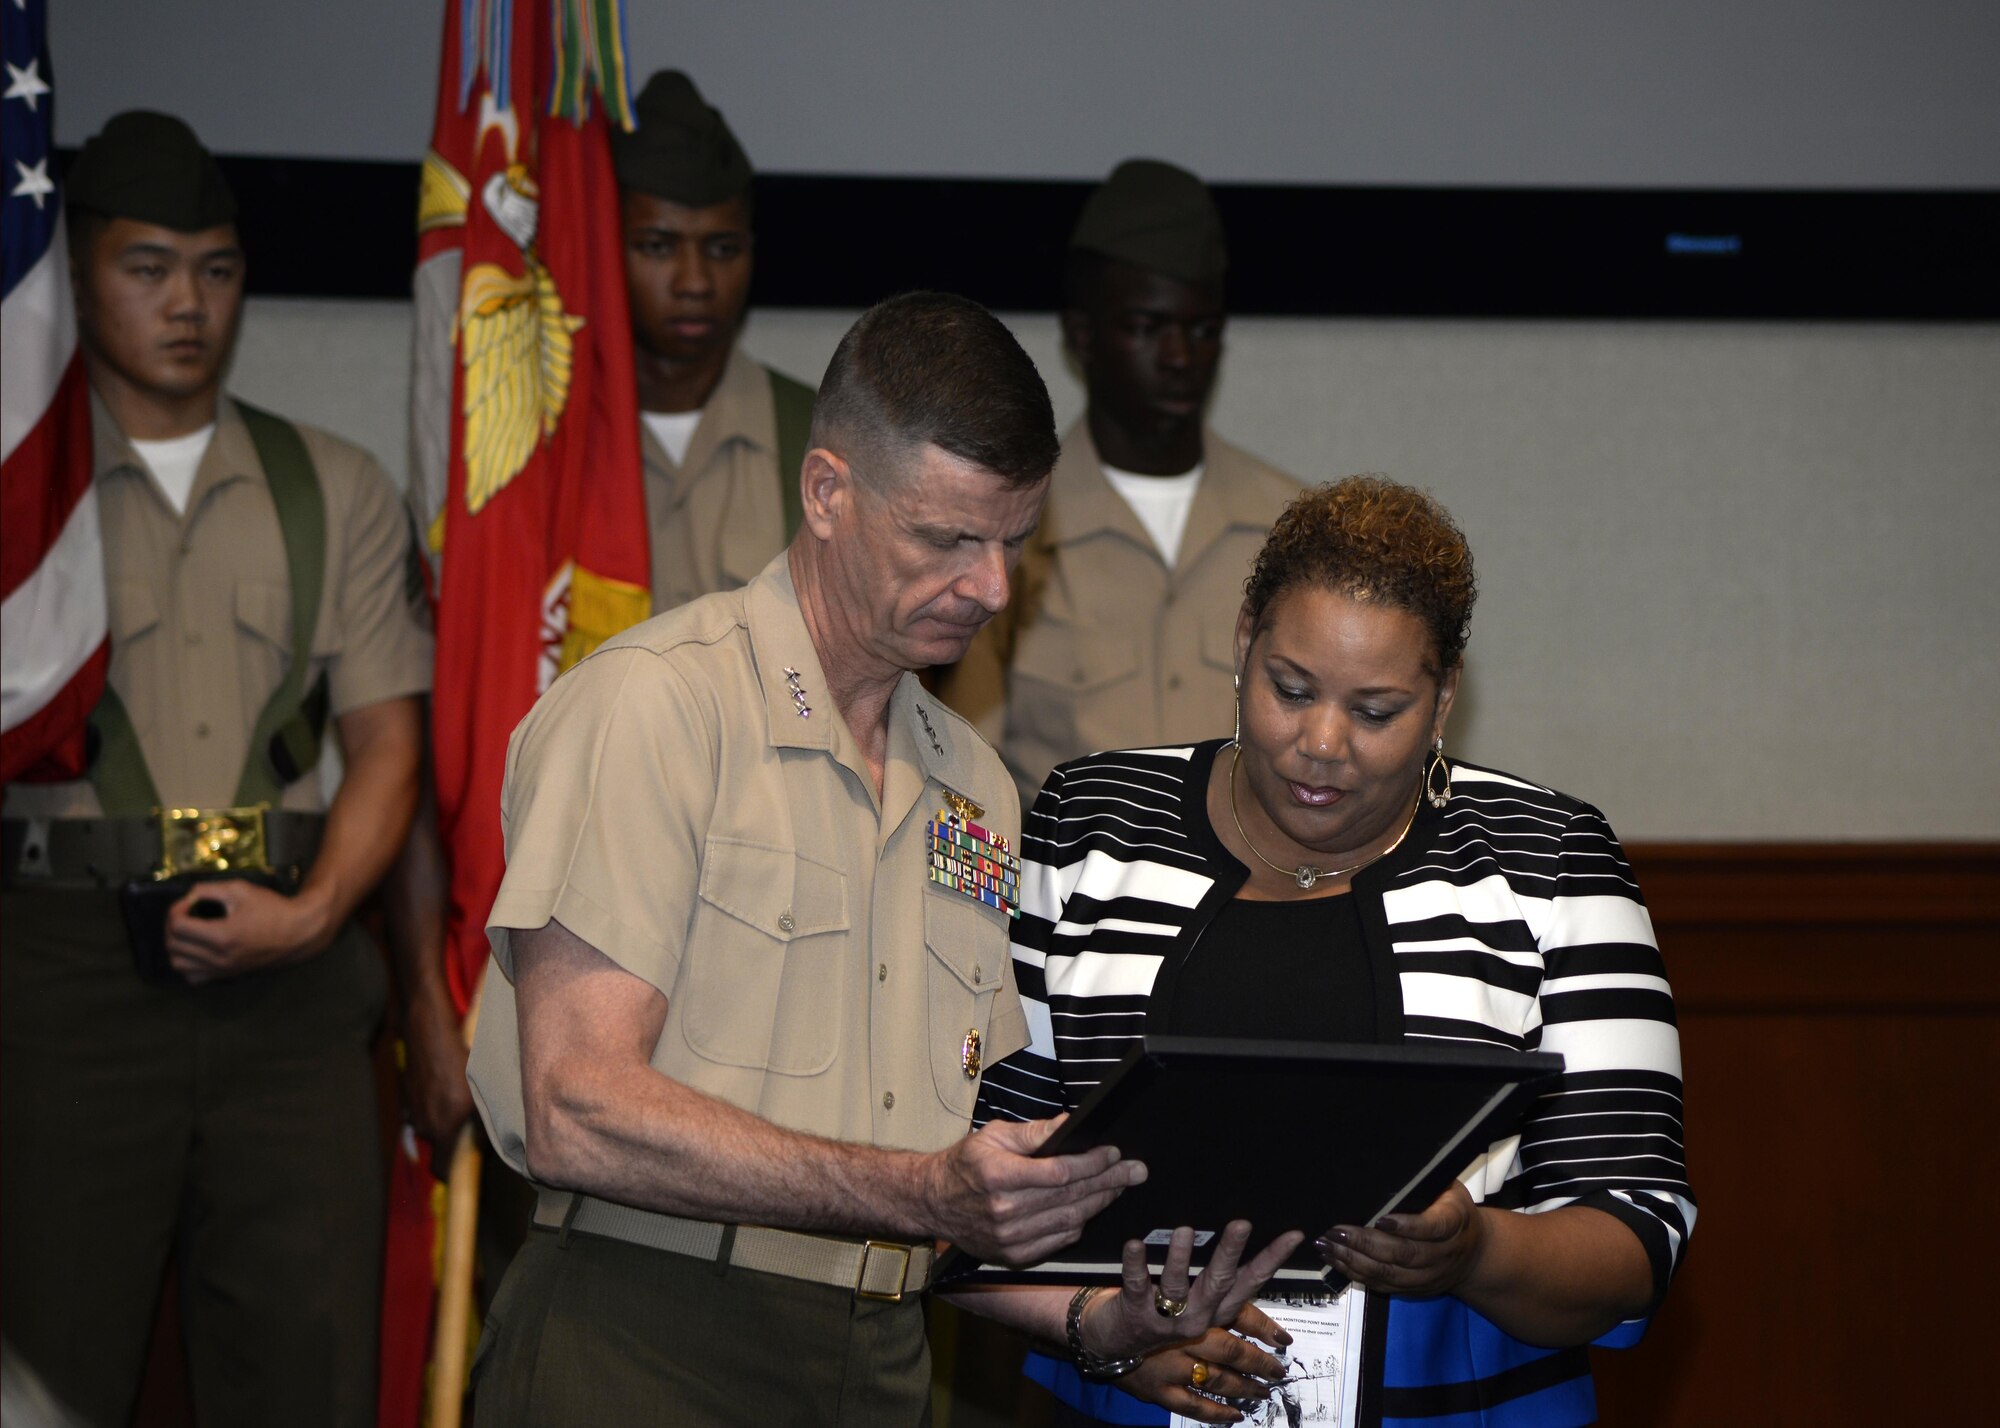 Kim Fountaine, right, accepts a certificate on behalf of her father, U.S. Marine Corps Pfc. Charles Robert Fountain, from Lt. Gen. William D. Beydler, commander of U.S. Marine Forces Central Command, during a Congressional Gold Medal ceremony at MacDill Air Force Base, Fla., Jan. 27, 2017. The certificate was awarded to Fountain who served in the Montford Point Marines, an all African-American unit that was segregated throughout World War II. (U.S. Air Force photo by Tech. Sgt. Krystie Martinez)